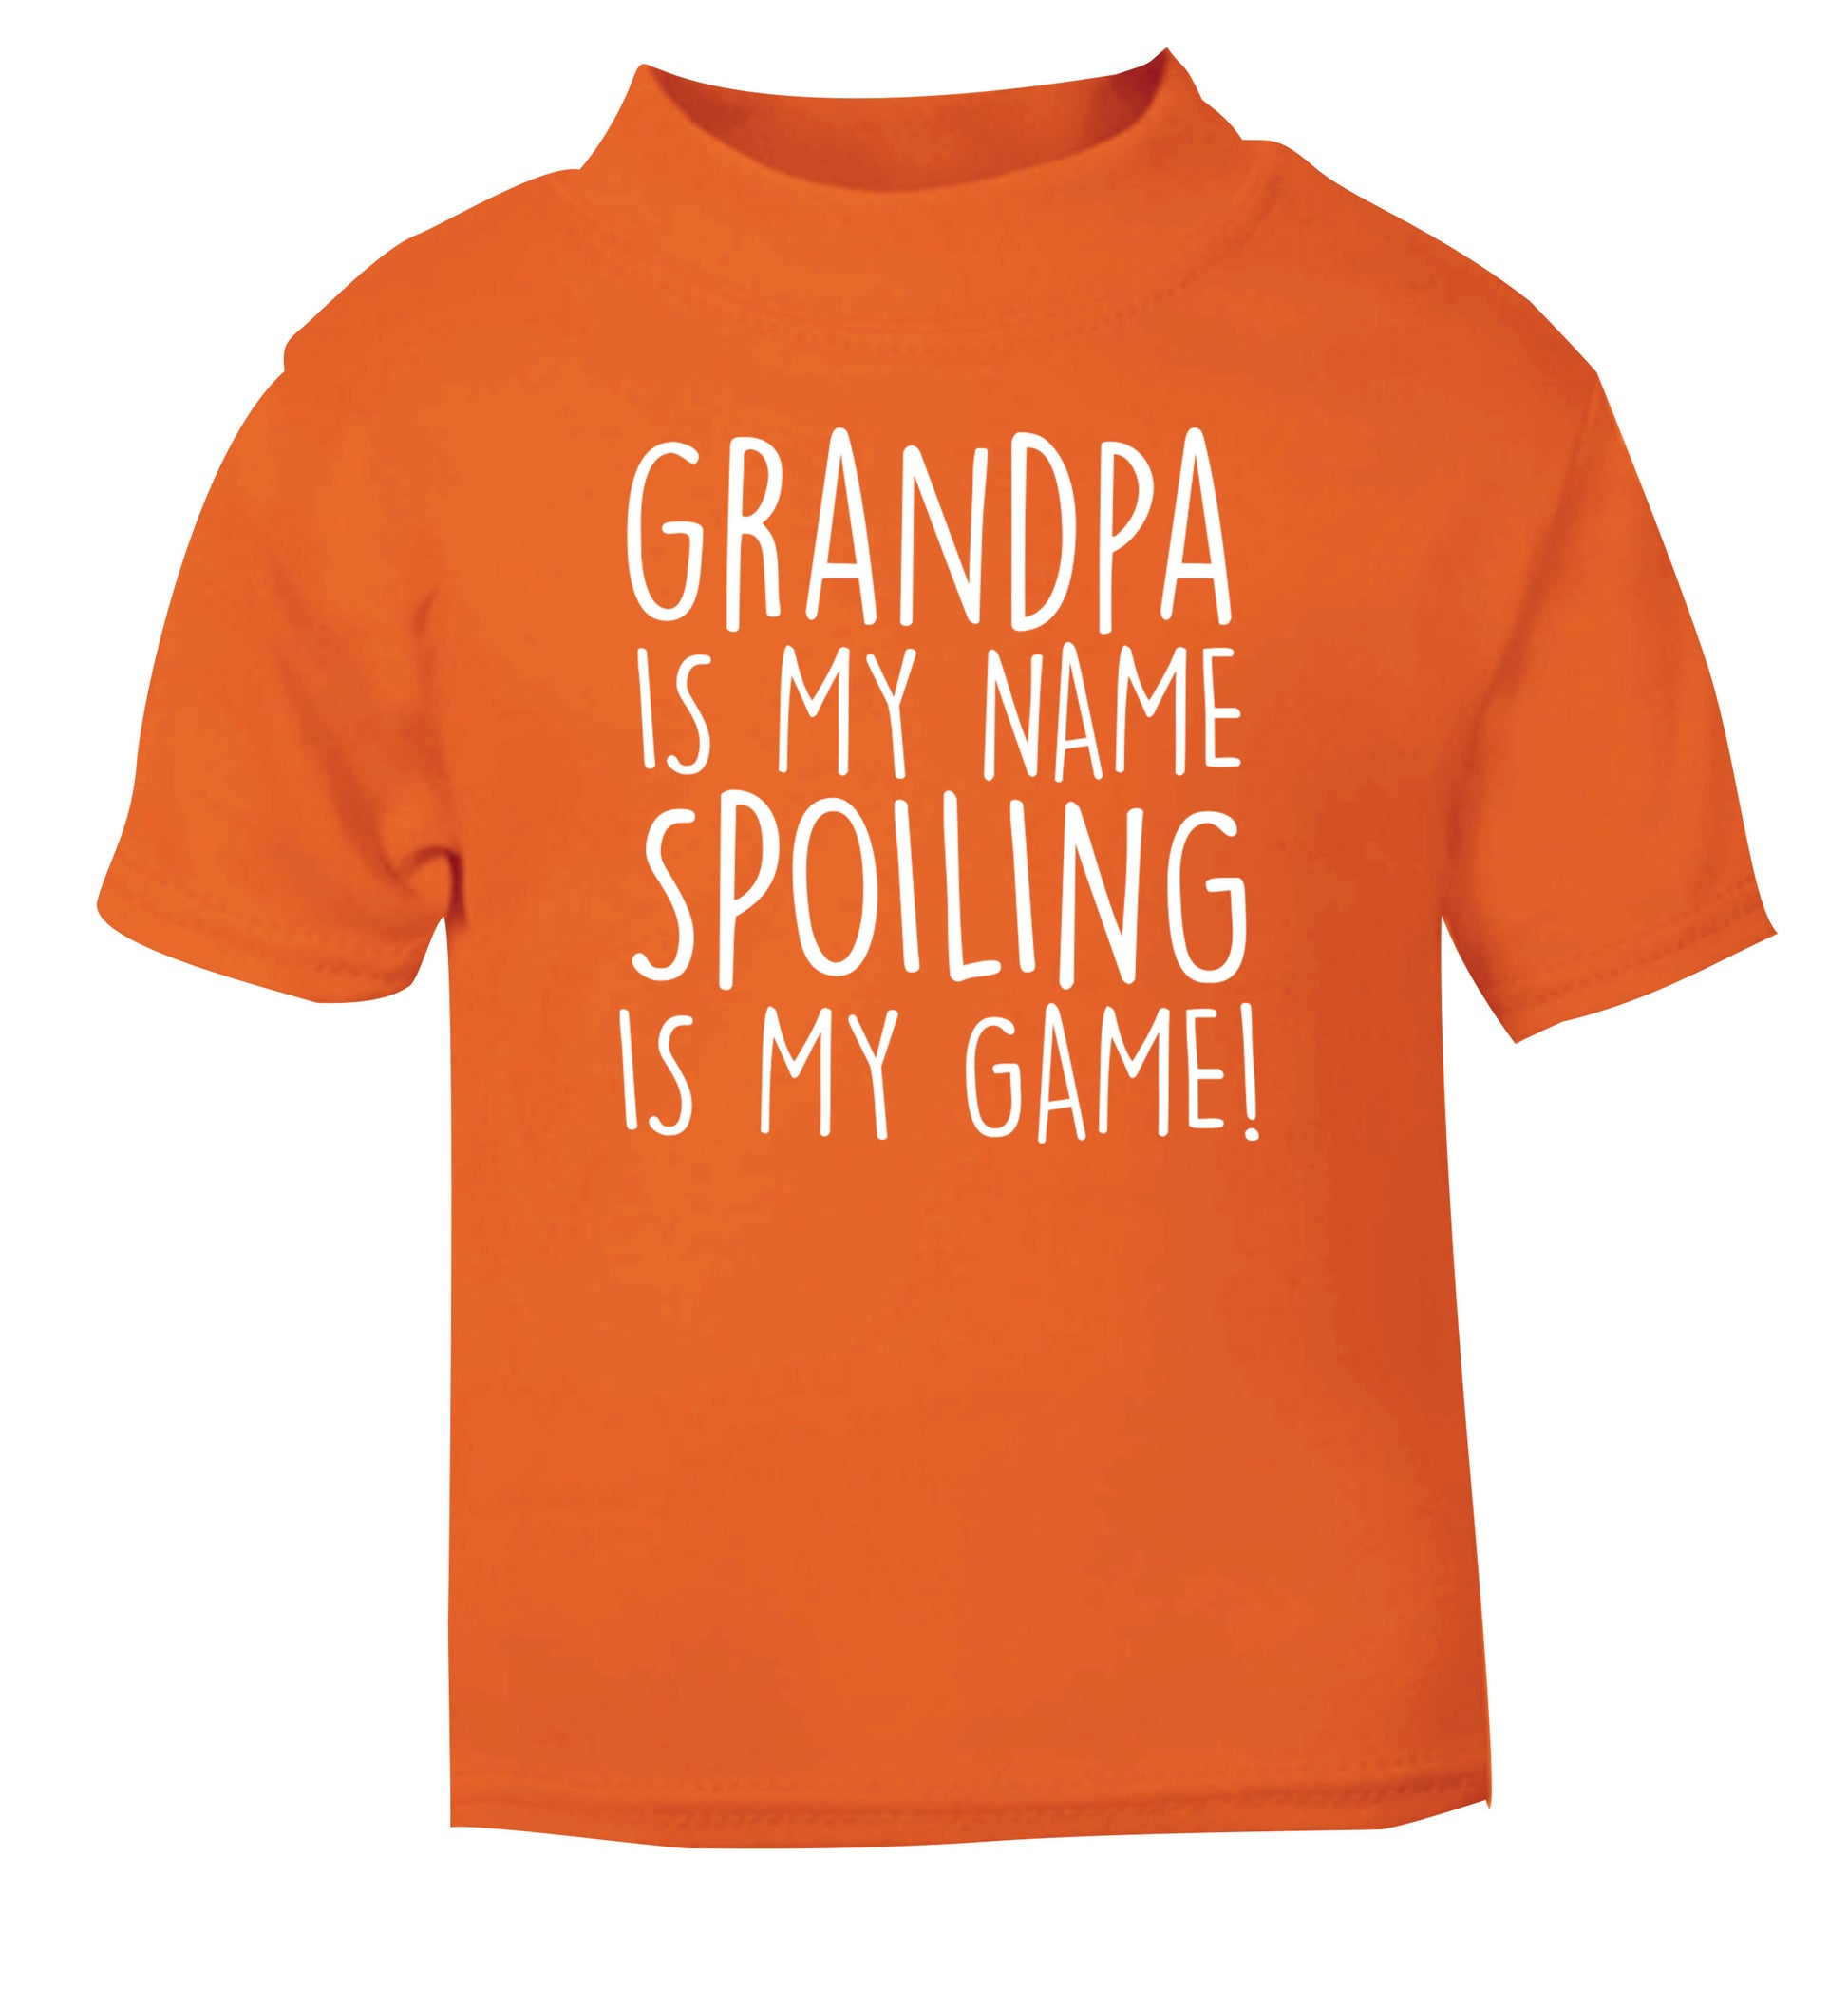 Grandpa is my name, spoiling is my game orange Baby Toddler Tshirt 2 Years